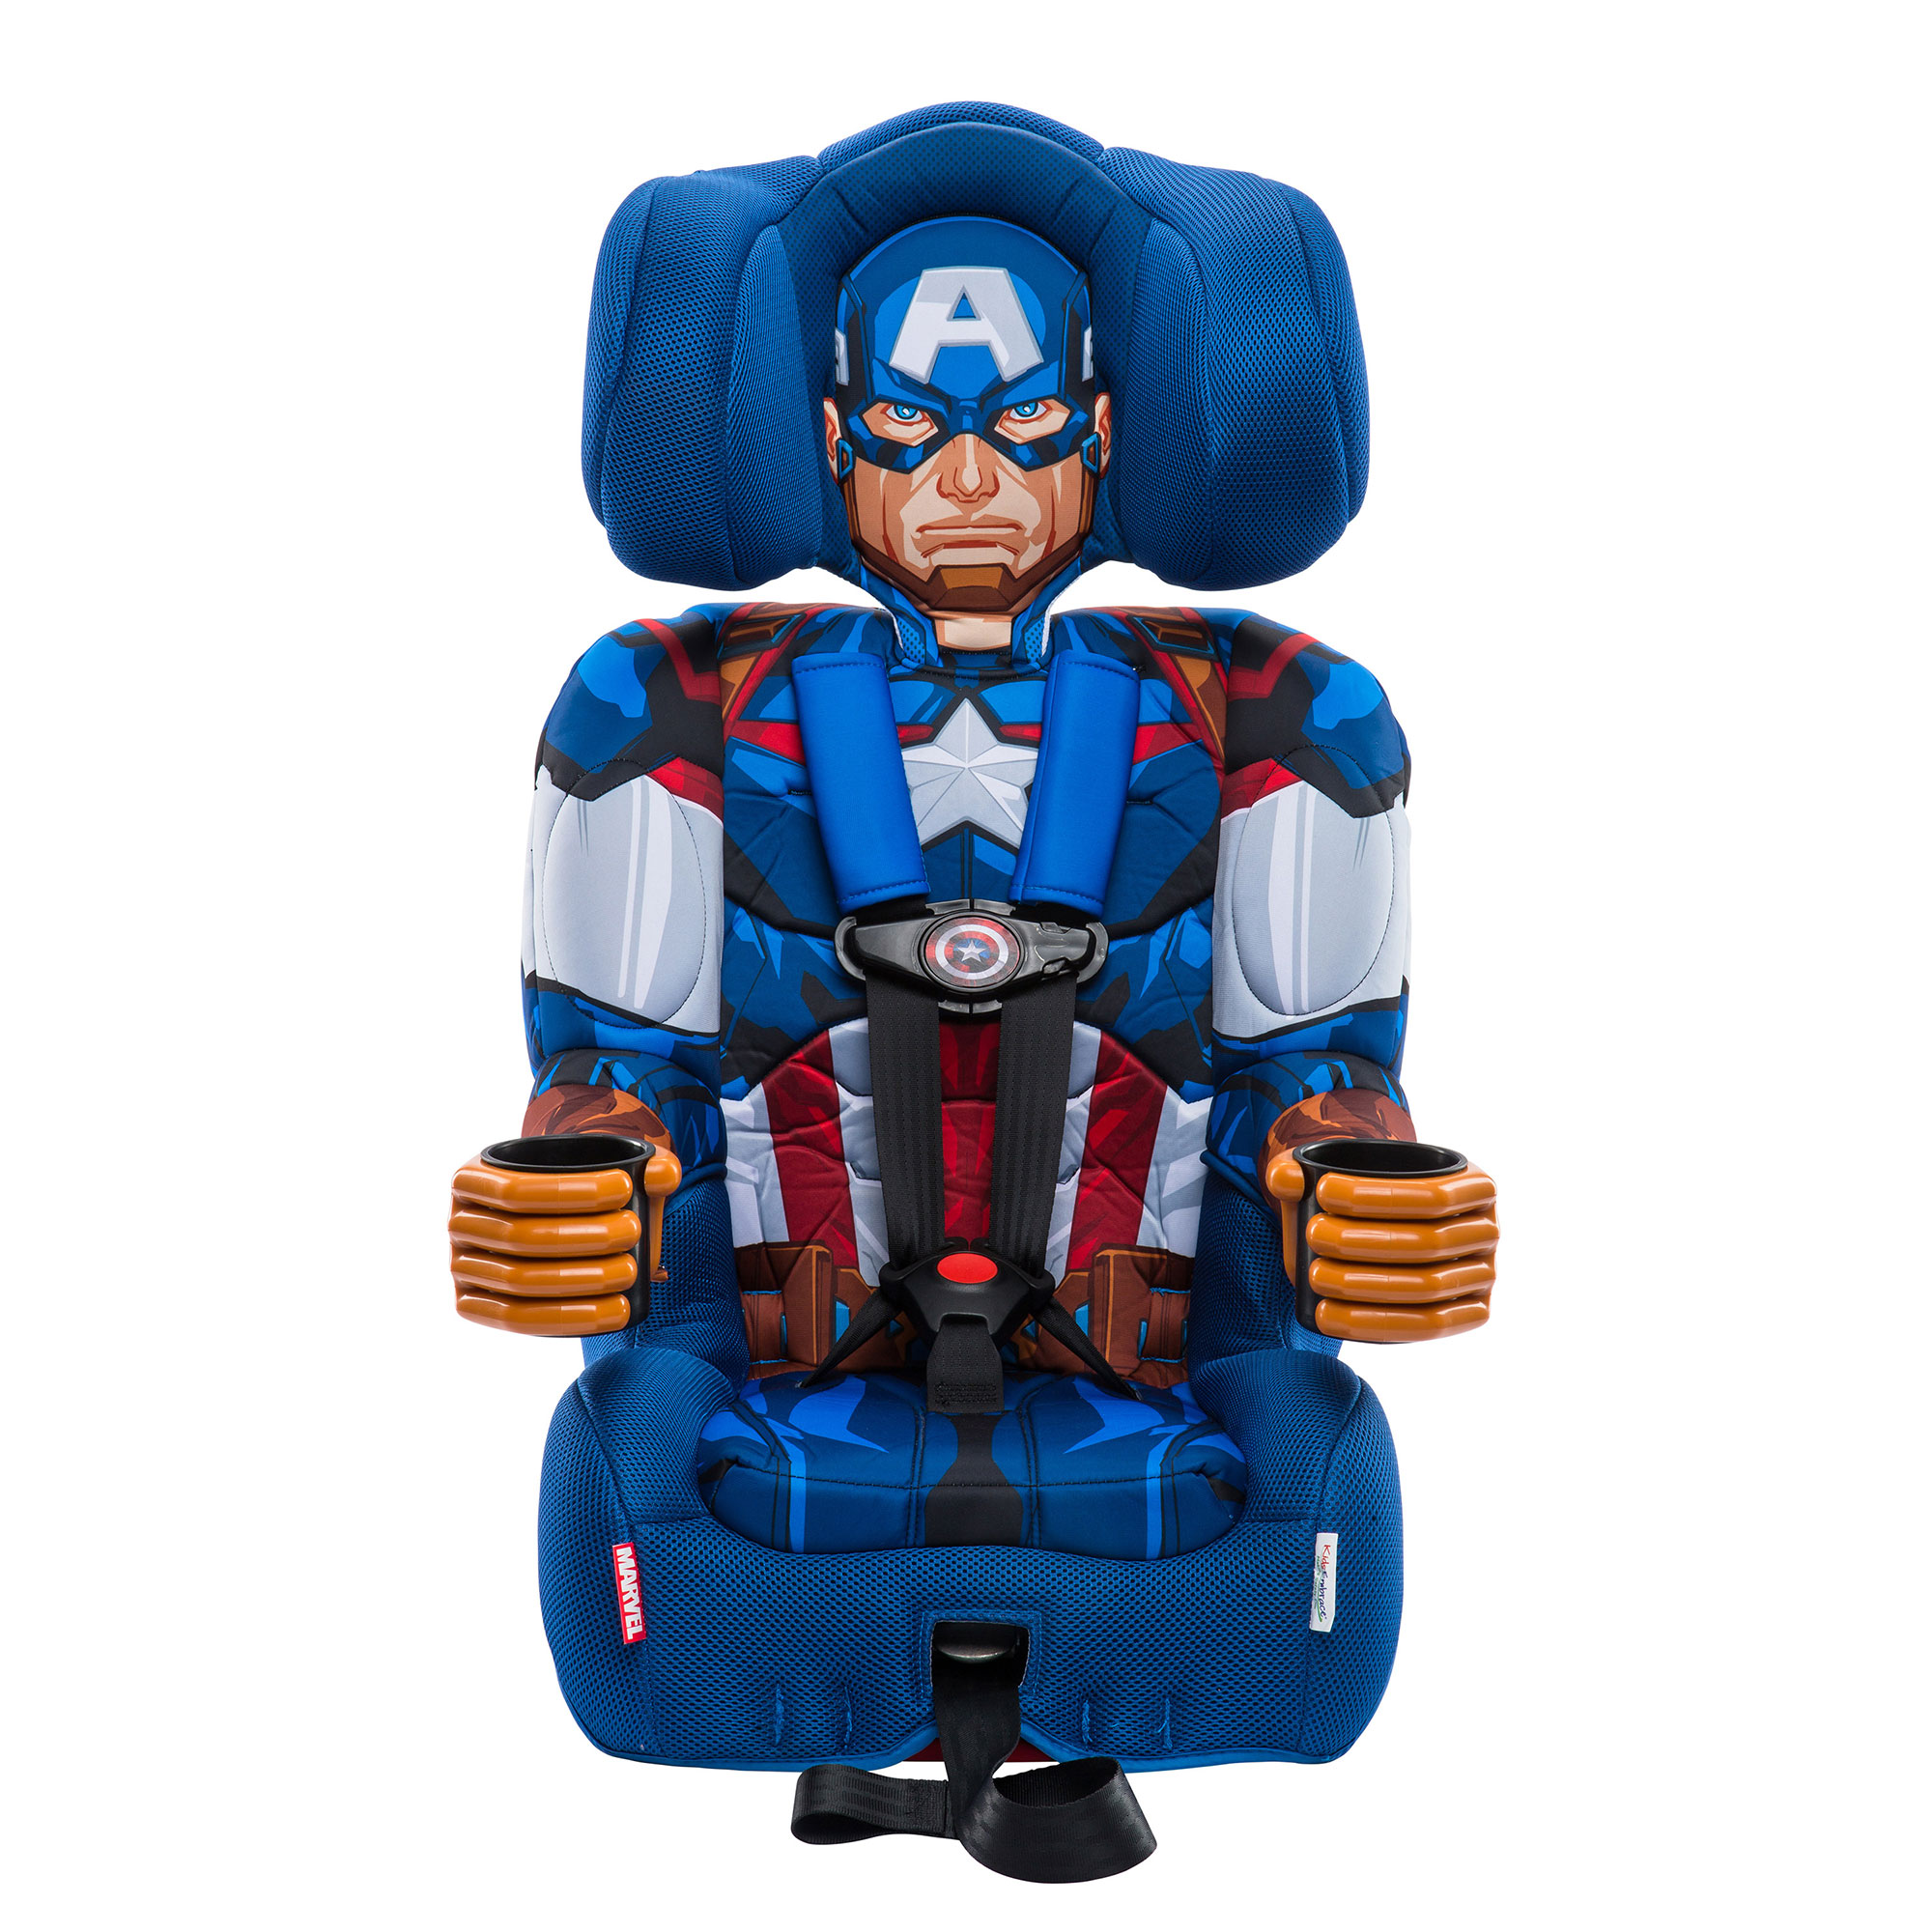 KidsEmbrace Combination Harness Booster Car Seat, Marvel Avengers Captain America - image 3 of 6